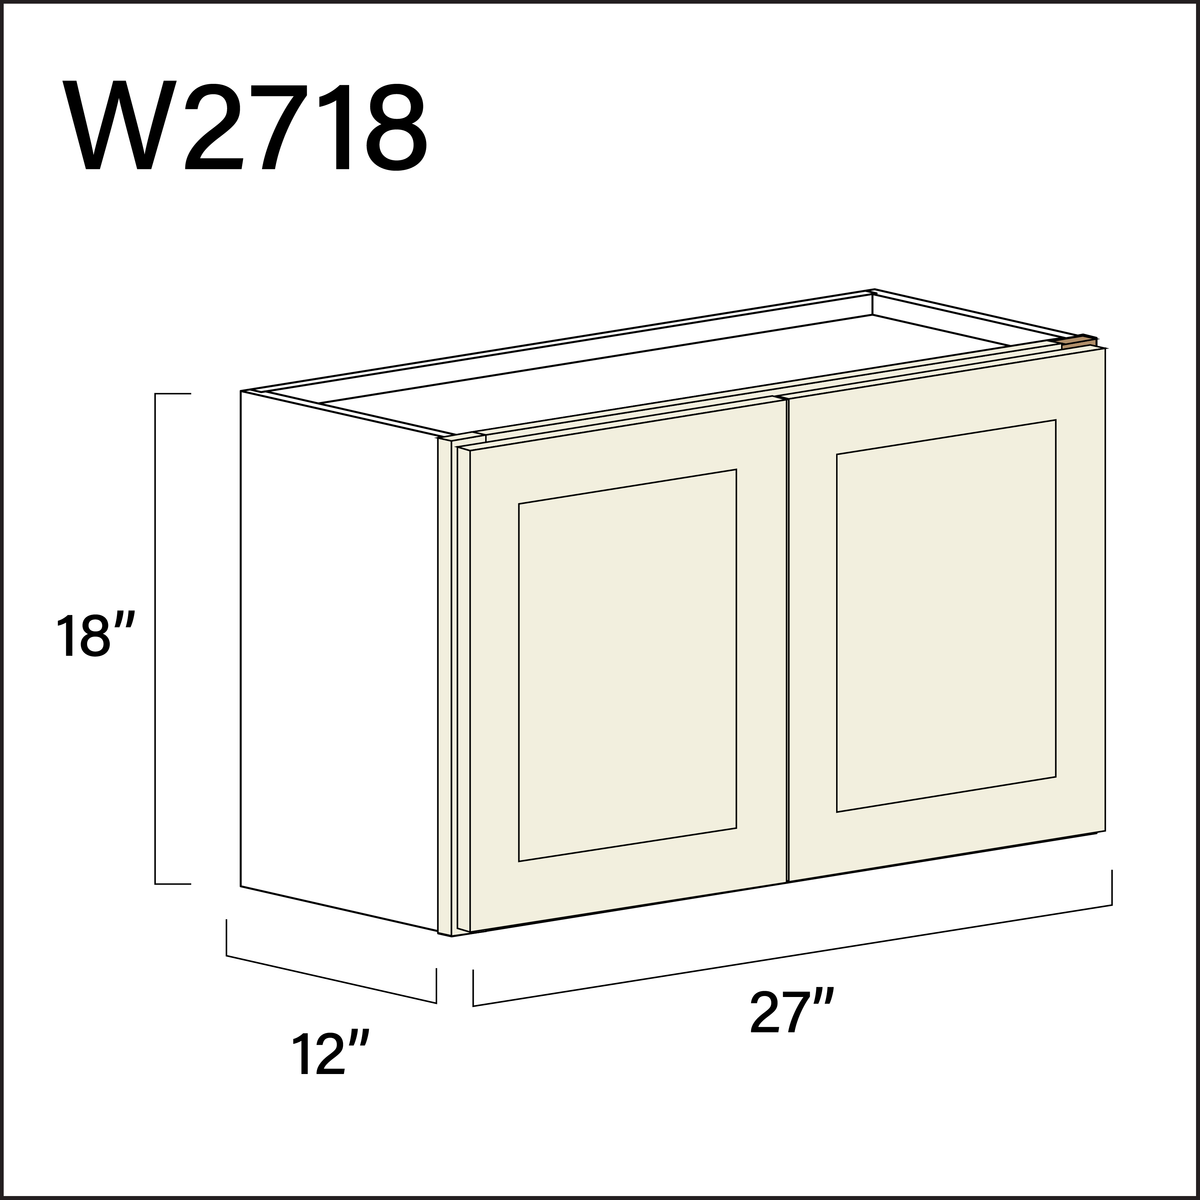 Alton Ivory White Double Door Wall Cabinet - 27" W x 18" H x 12" D